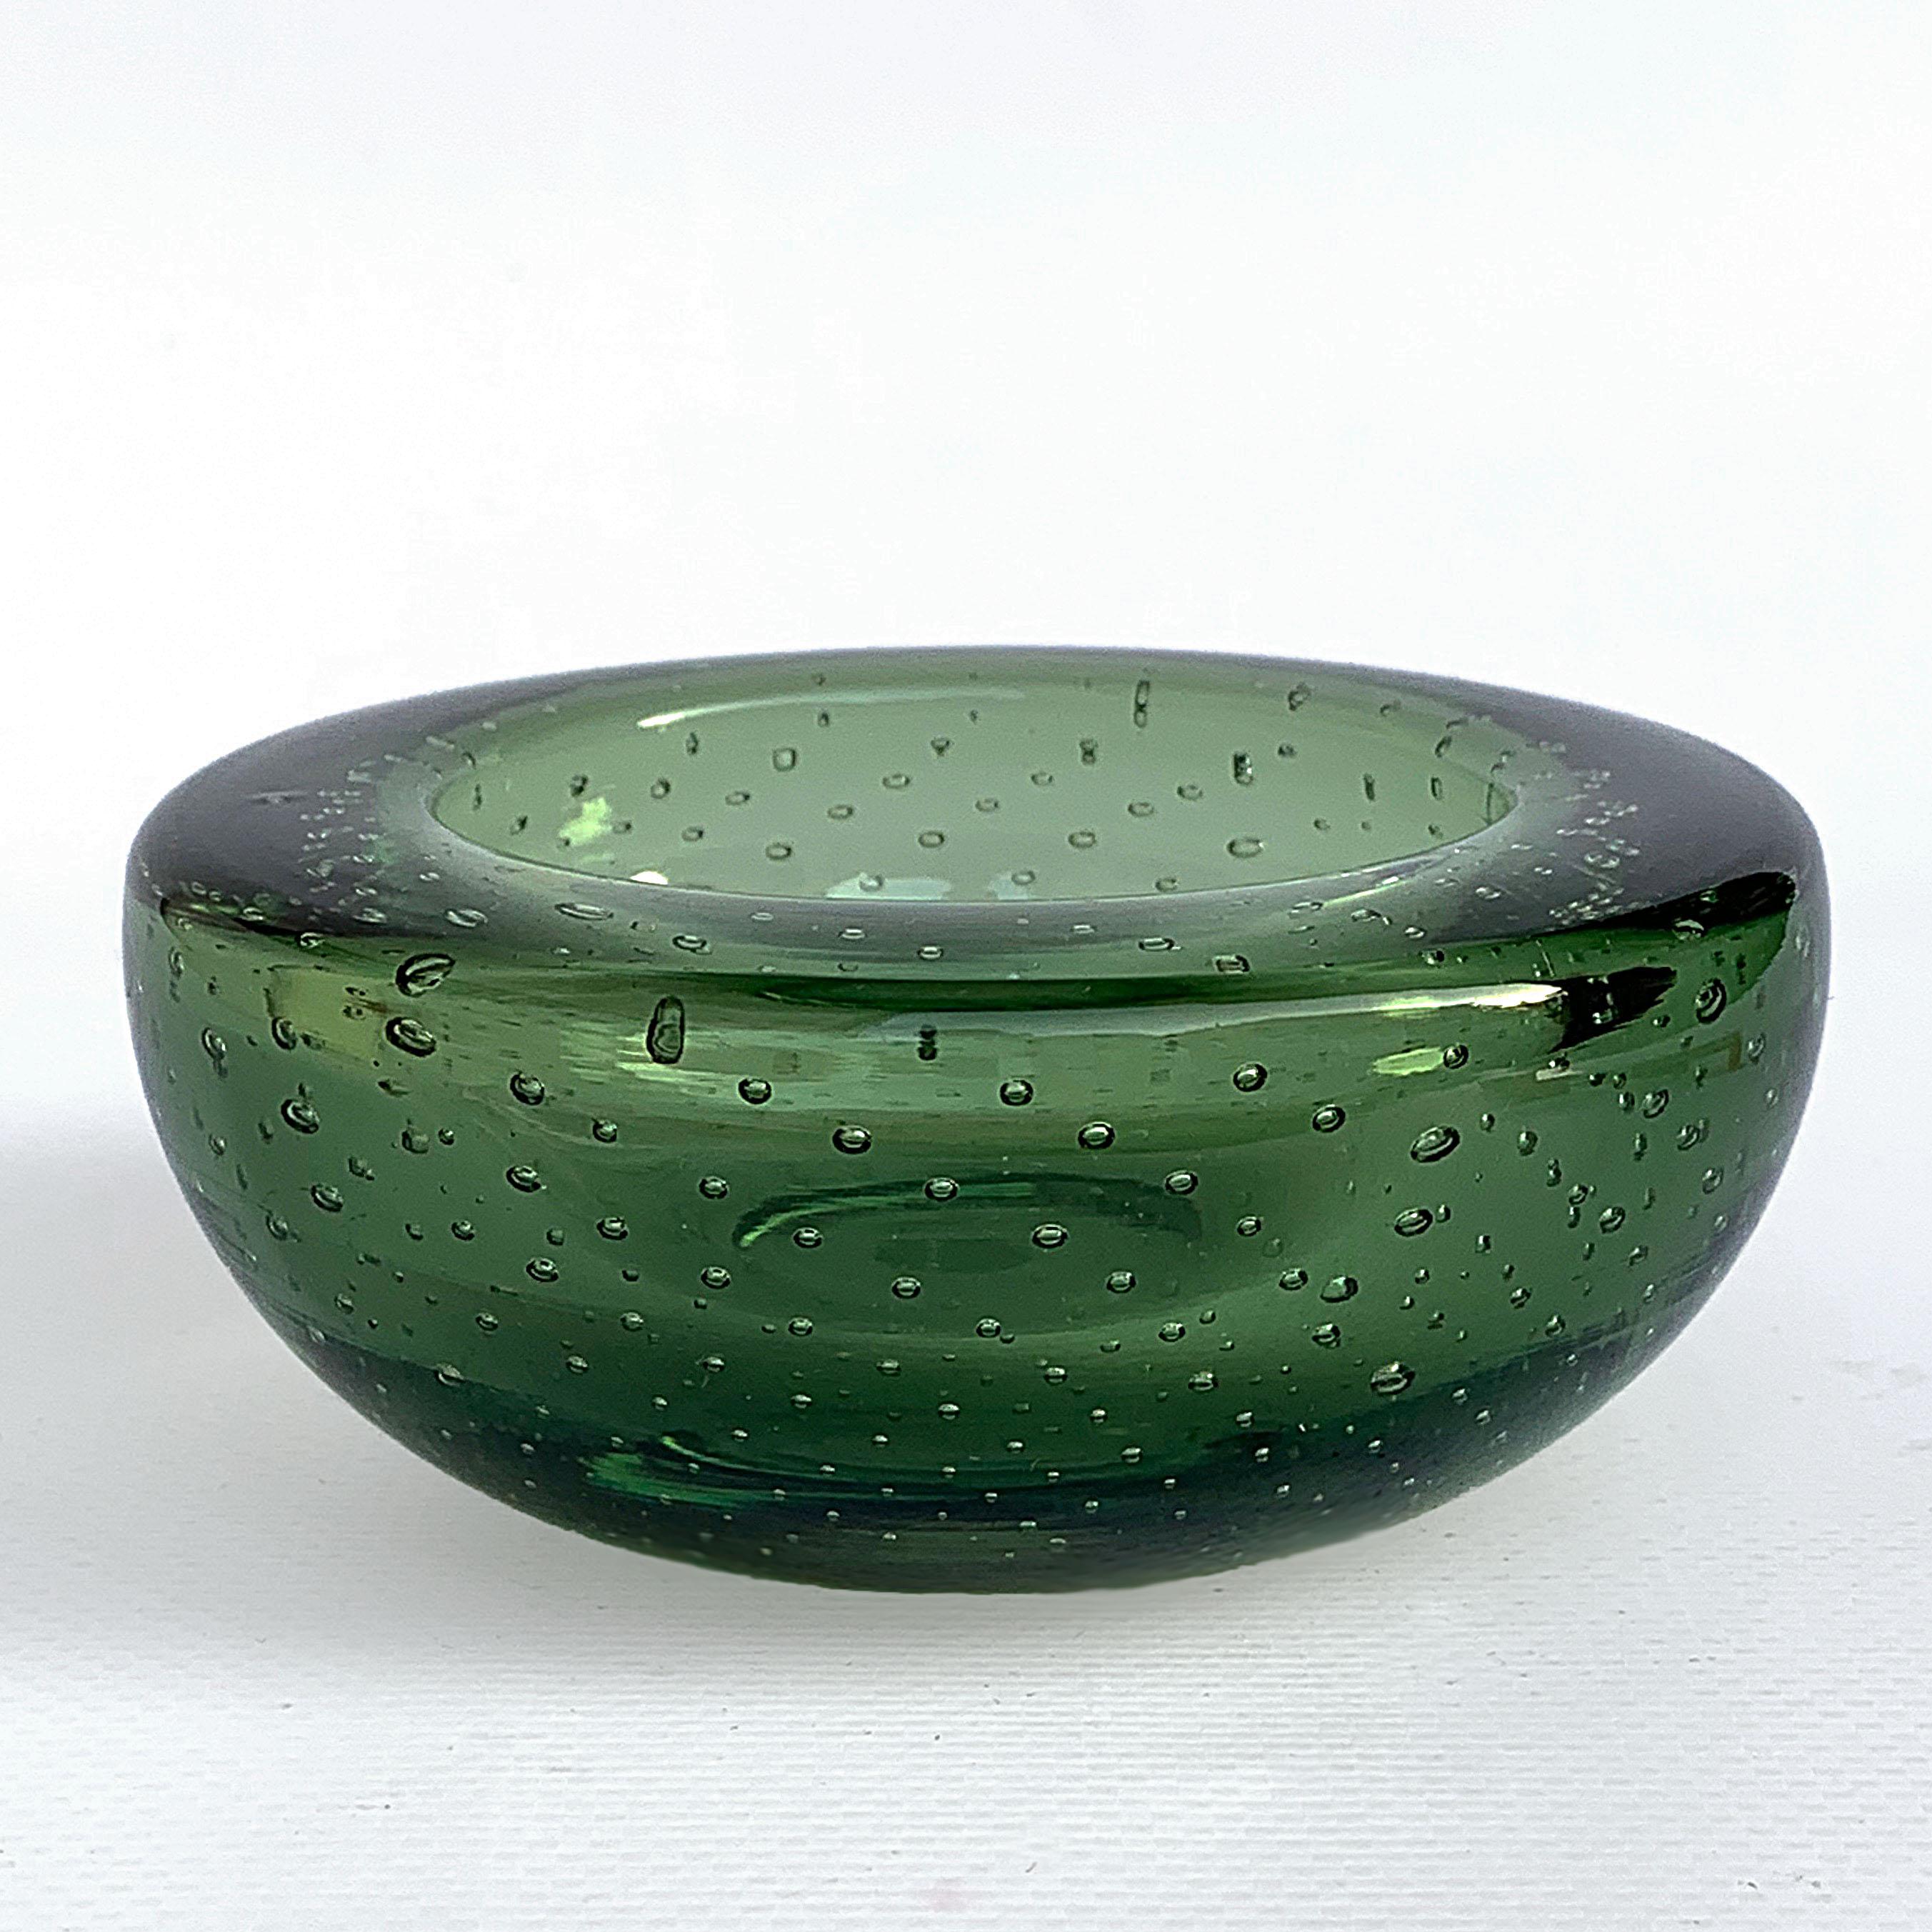 Attributed to Galliano Ferro, ashtray or glass bowl, green, controlled bubbles Murano.
Air bubbles.
No chipping.